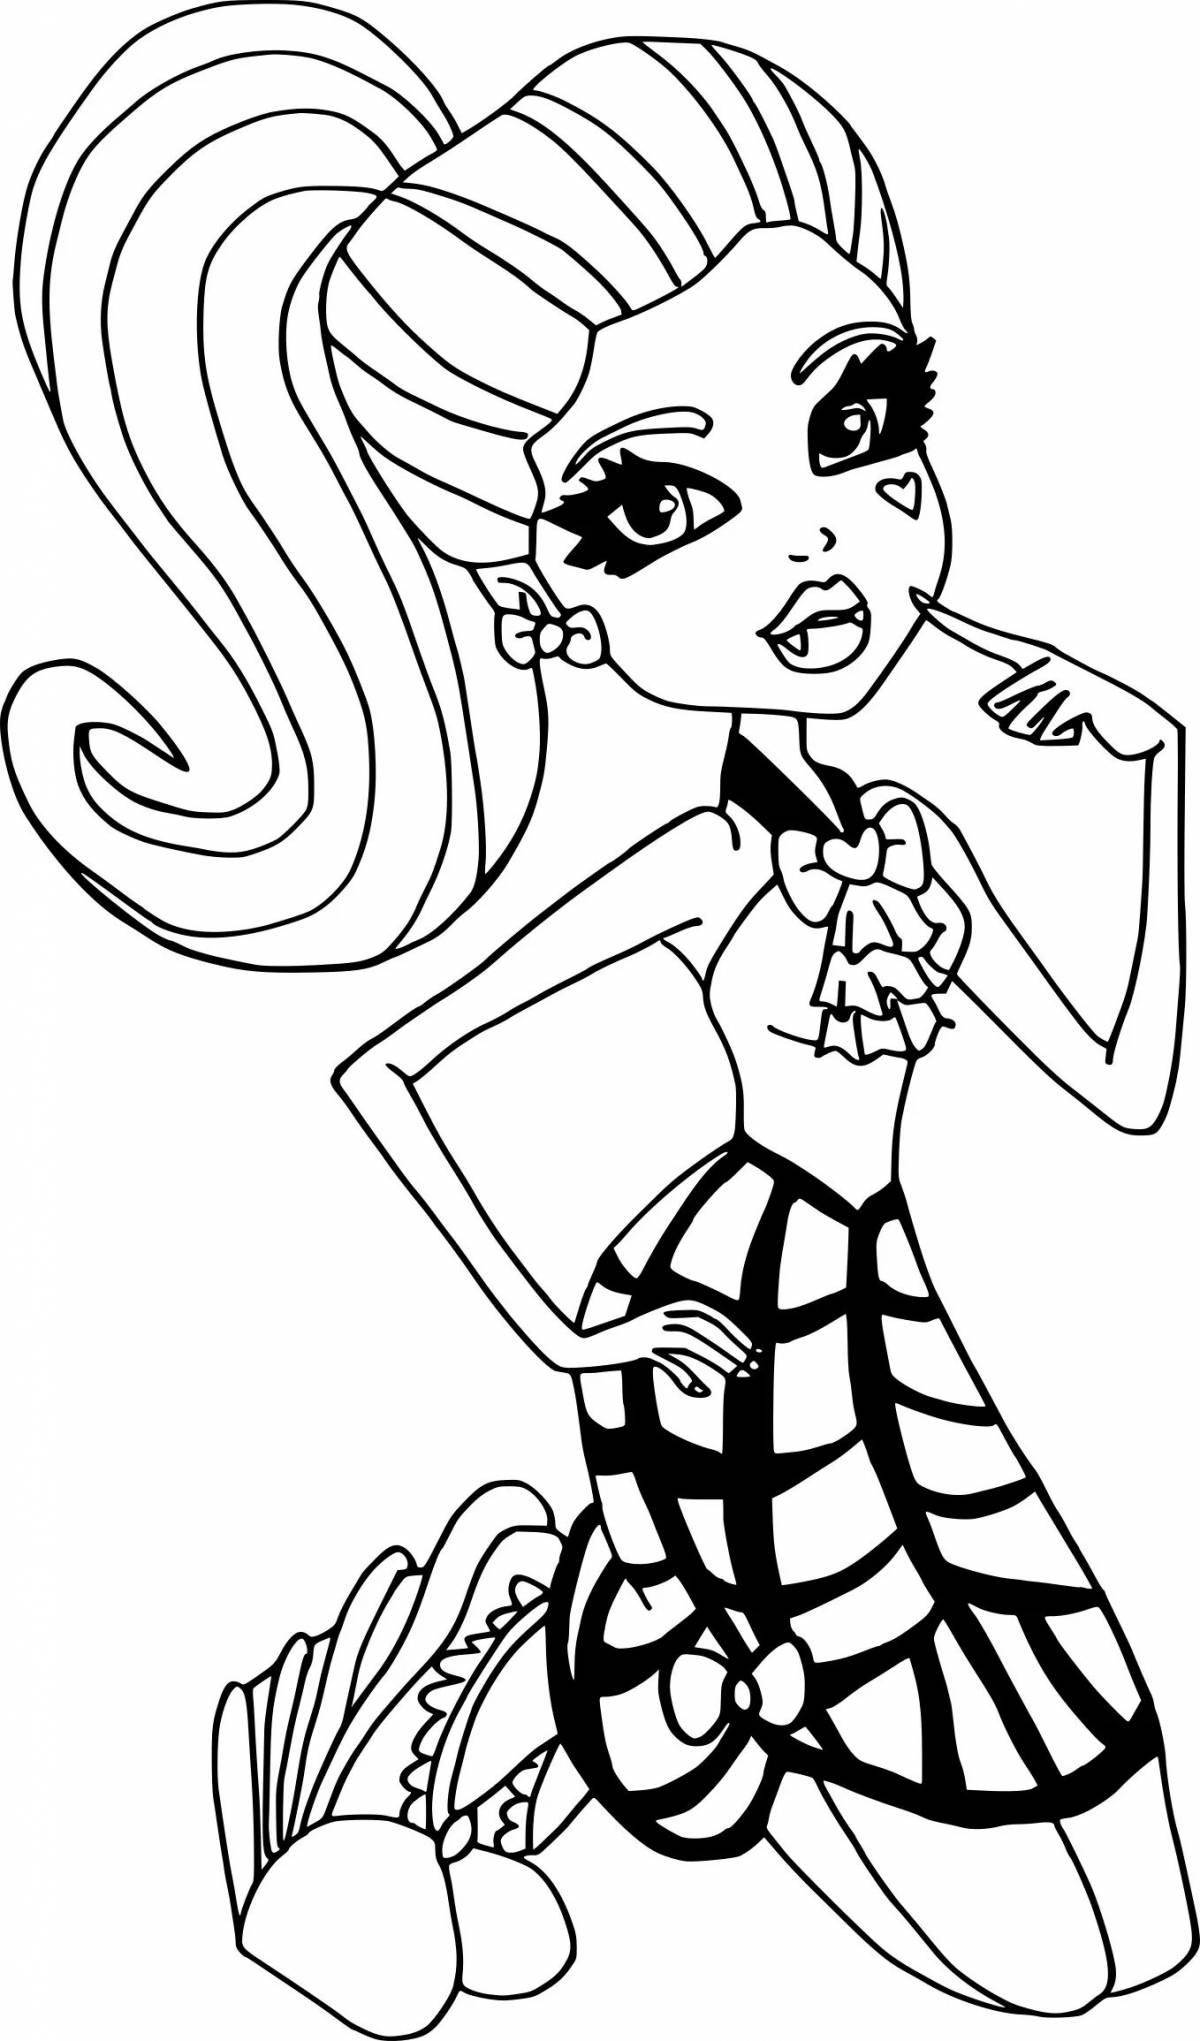 Draculaura style coloring book